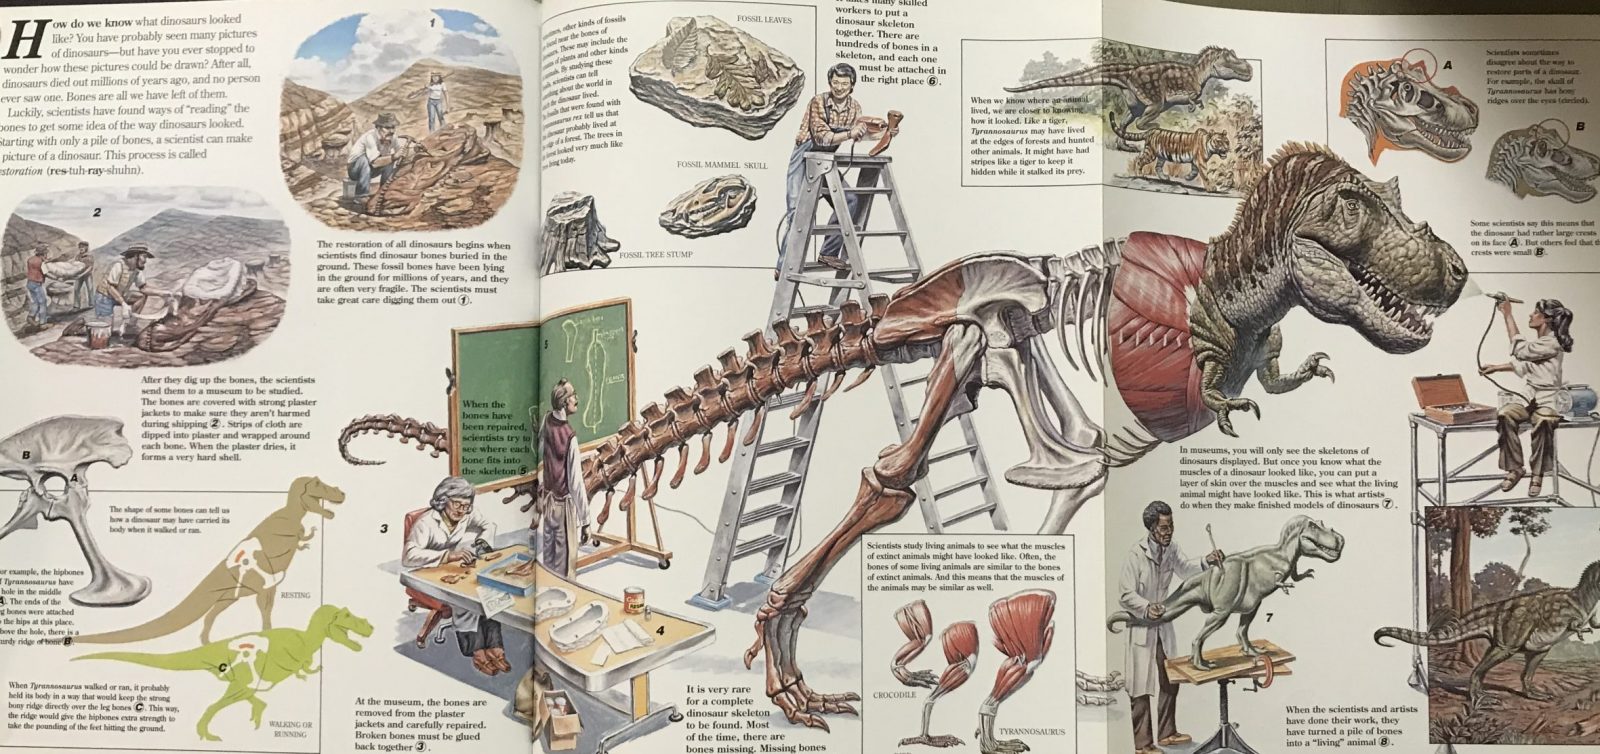 A fold-out spread depicting the process of artistically reconstruction a dinosaur.